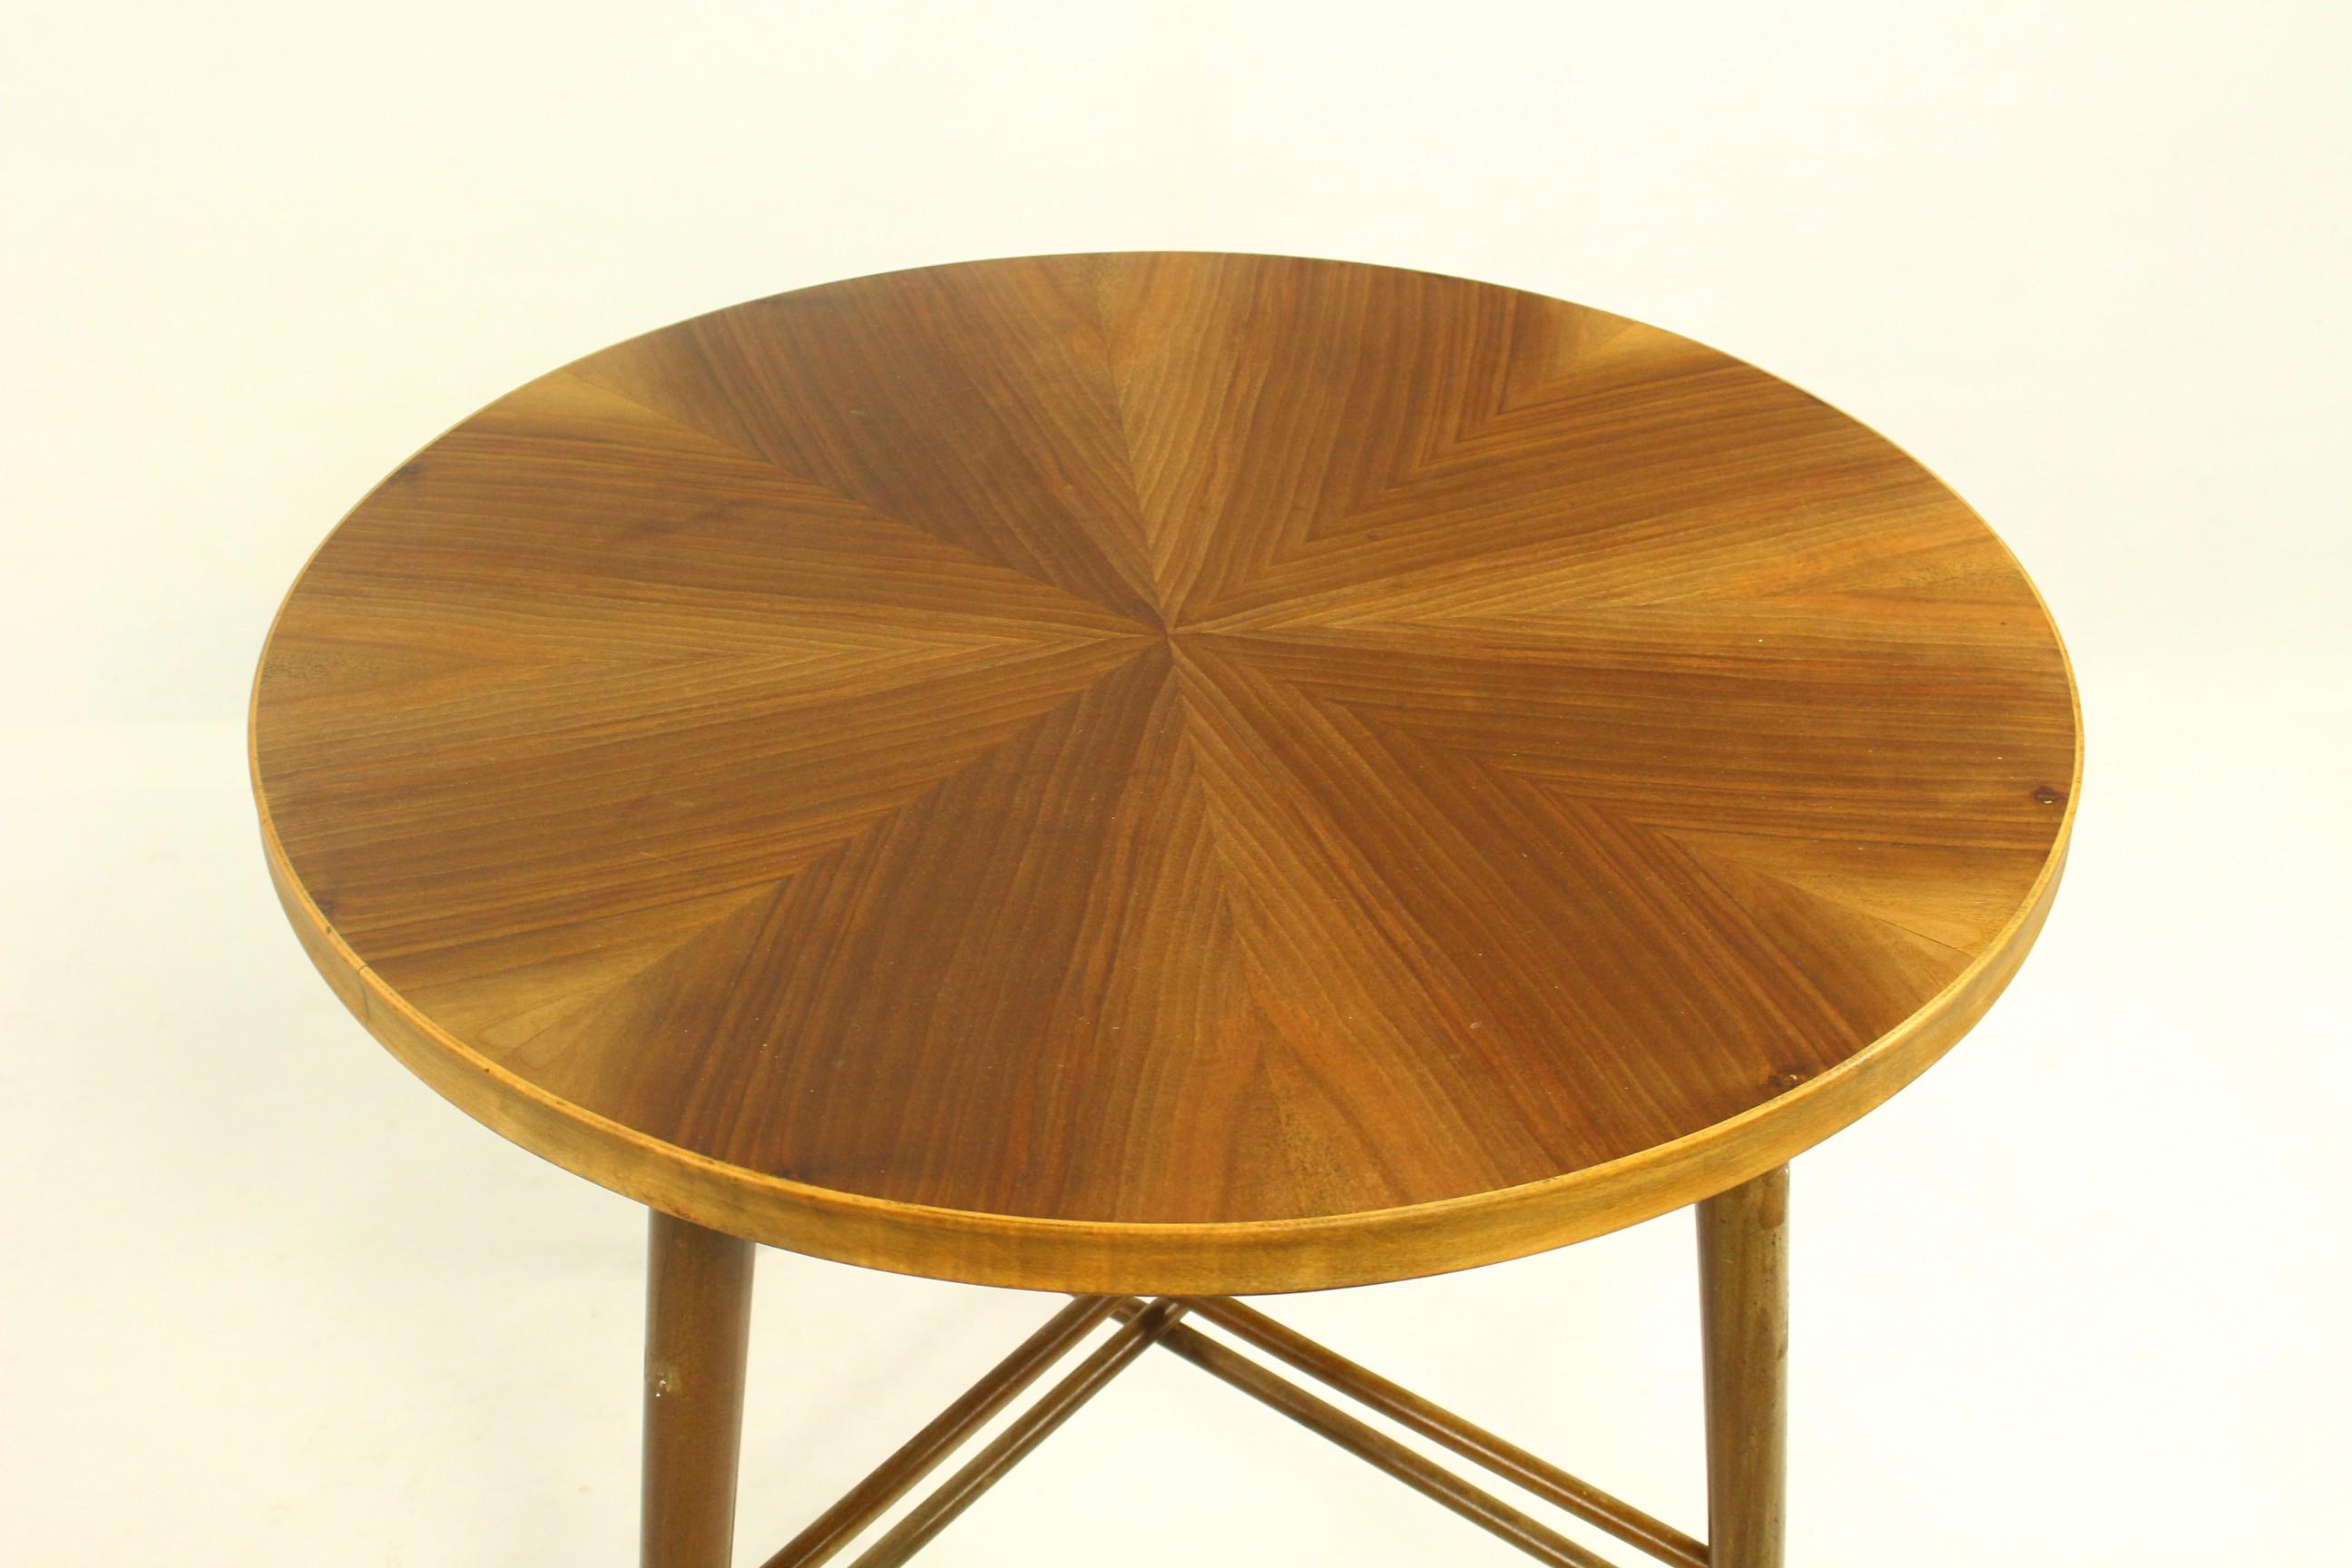 A beautiful Danish round coffee table from the 1970s.
Beautiful wood grain on the top, visible traces of use on the legs.
The table will be disassembled for shipping.